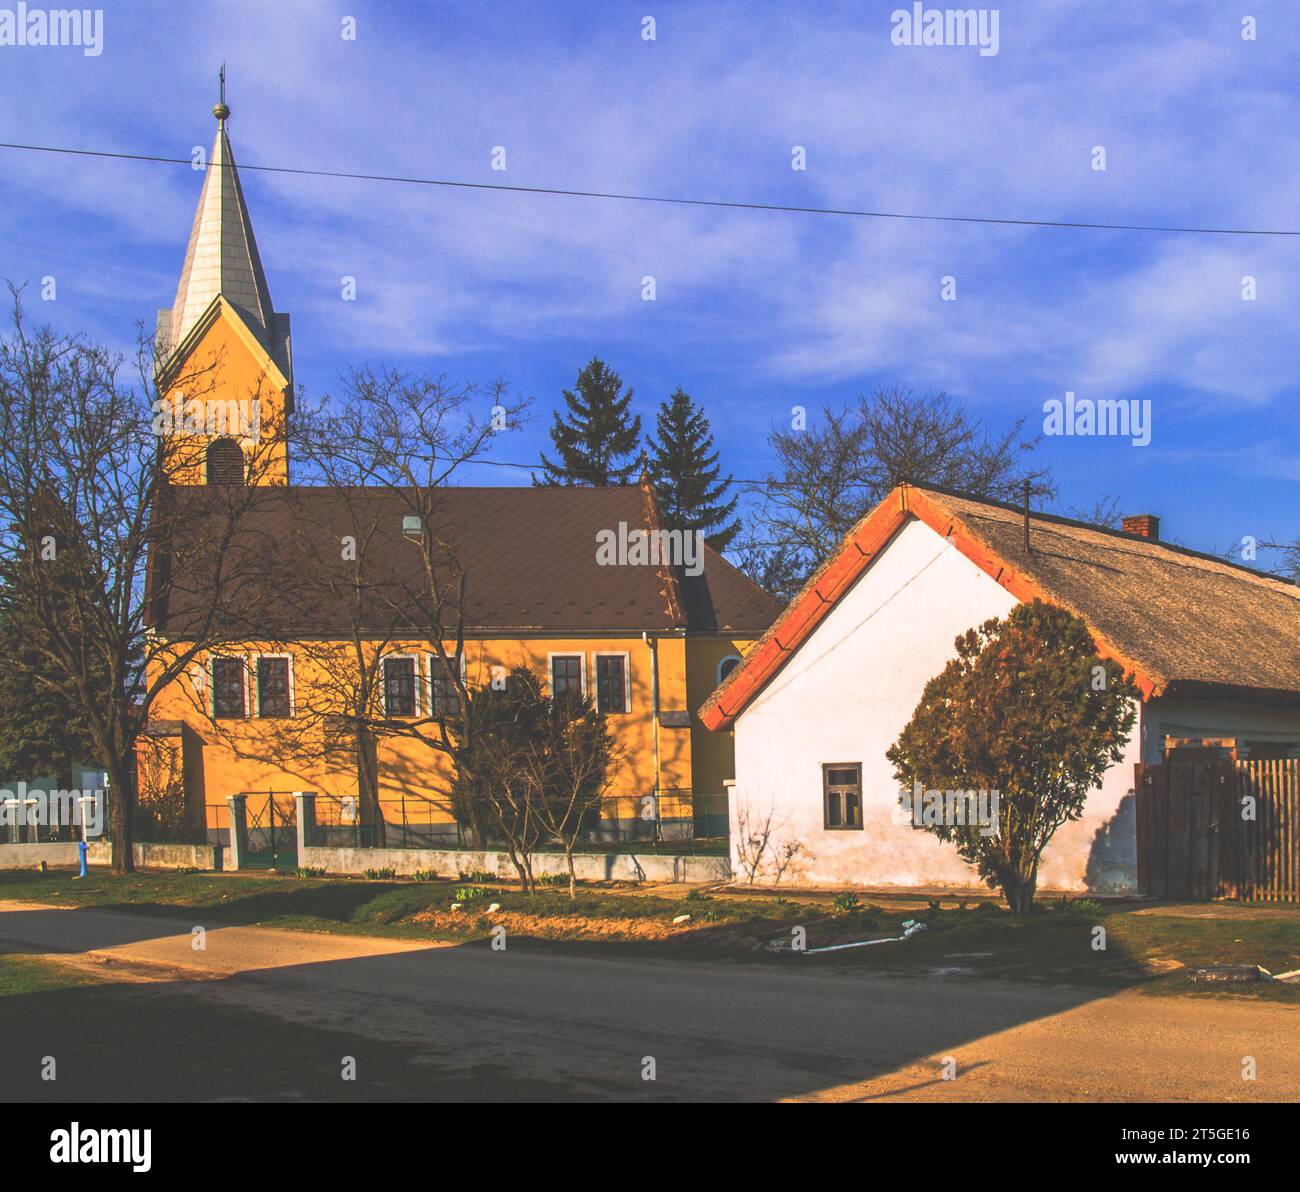 Small village church and small thatched house, idyllic village surroundings Stock Photo